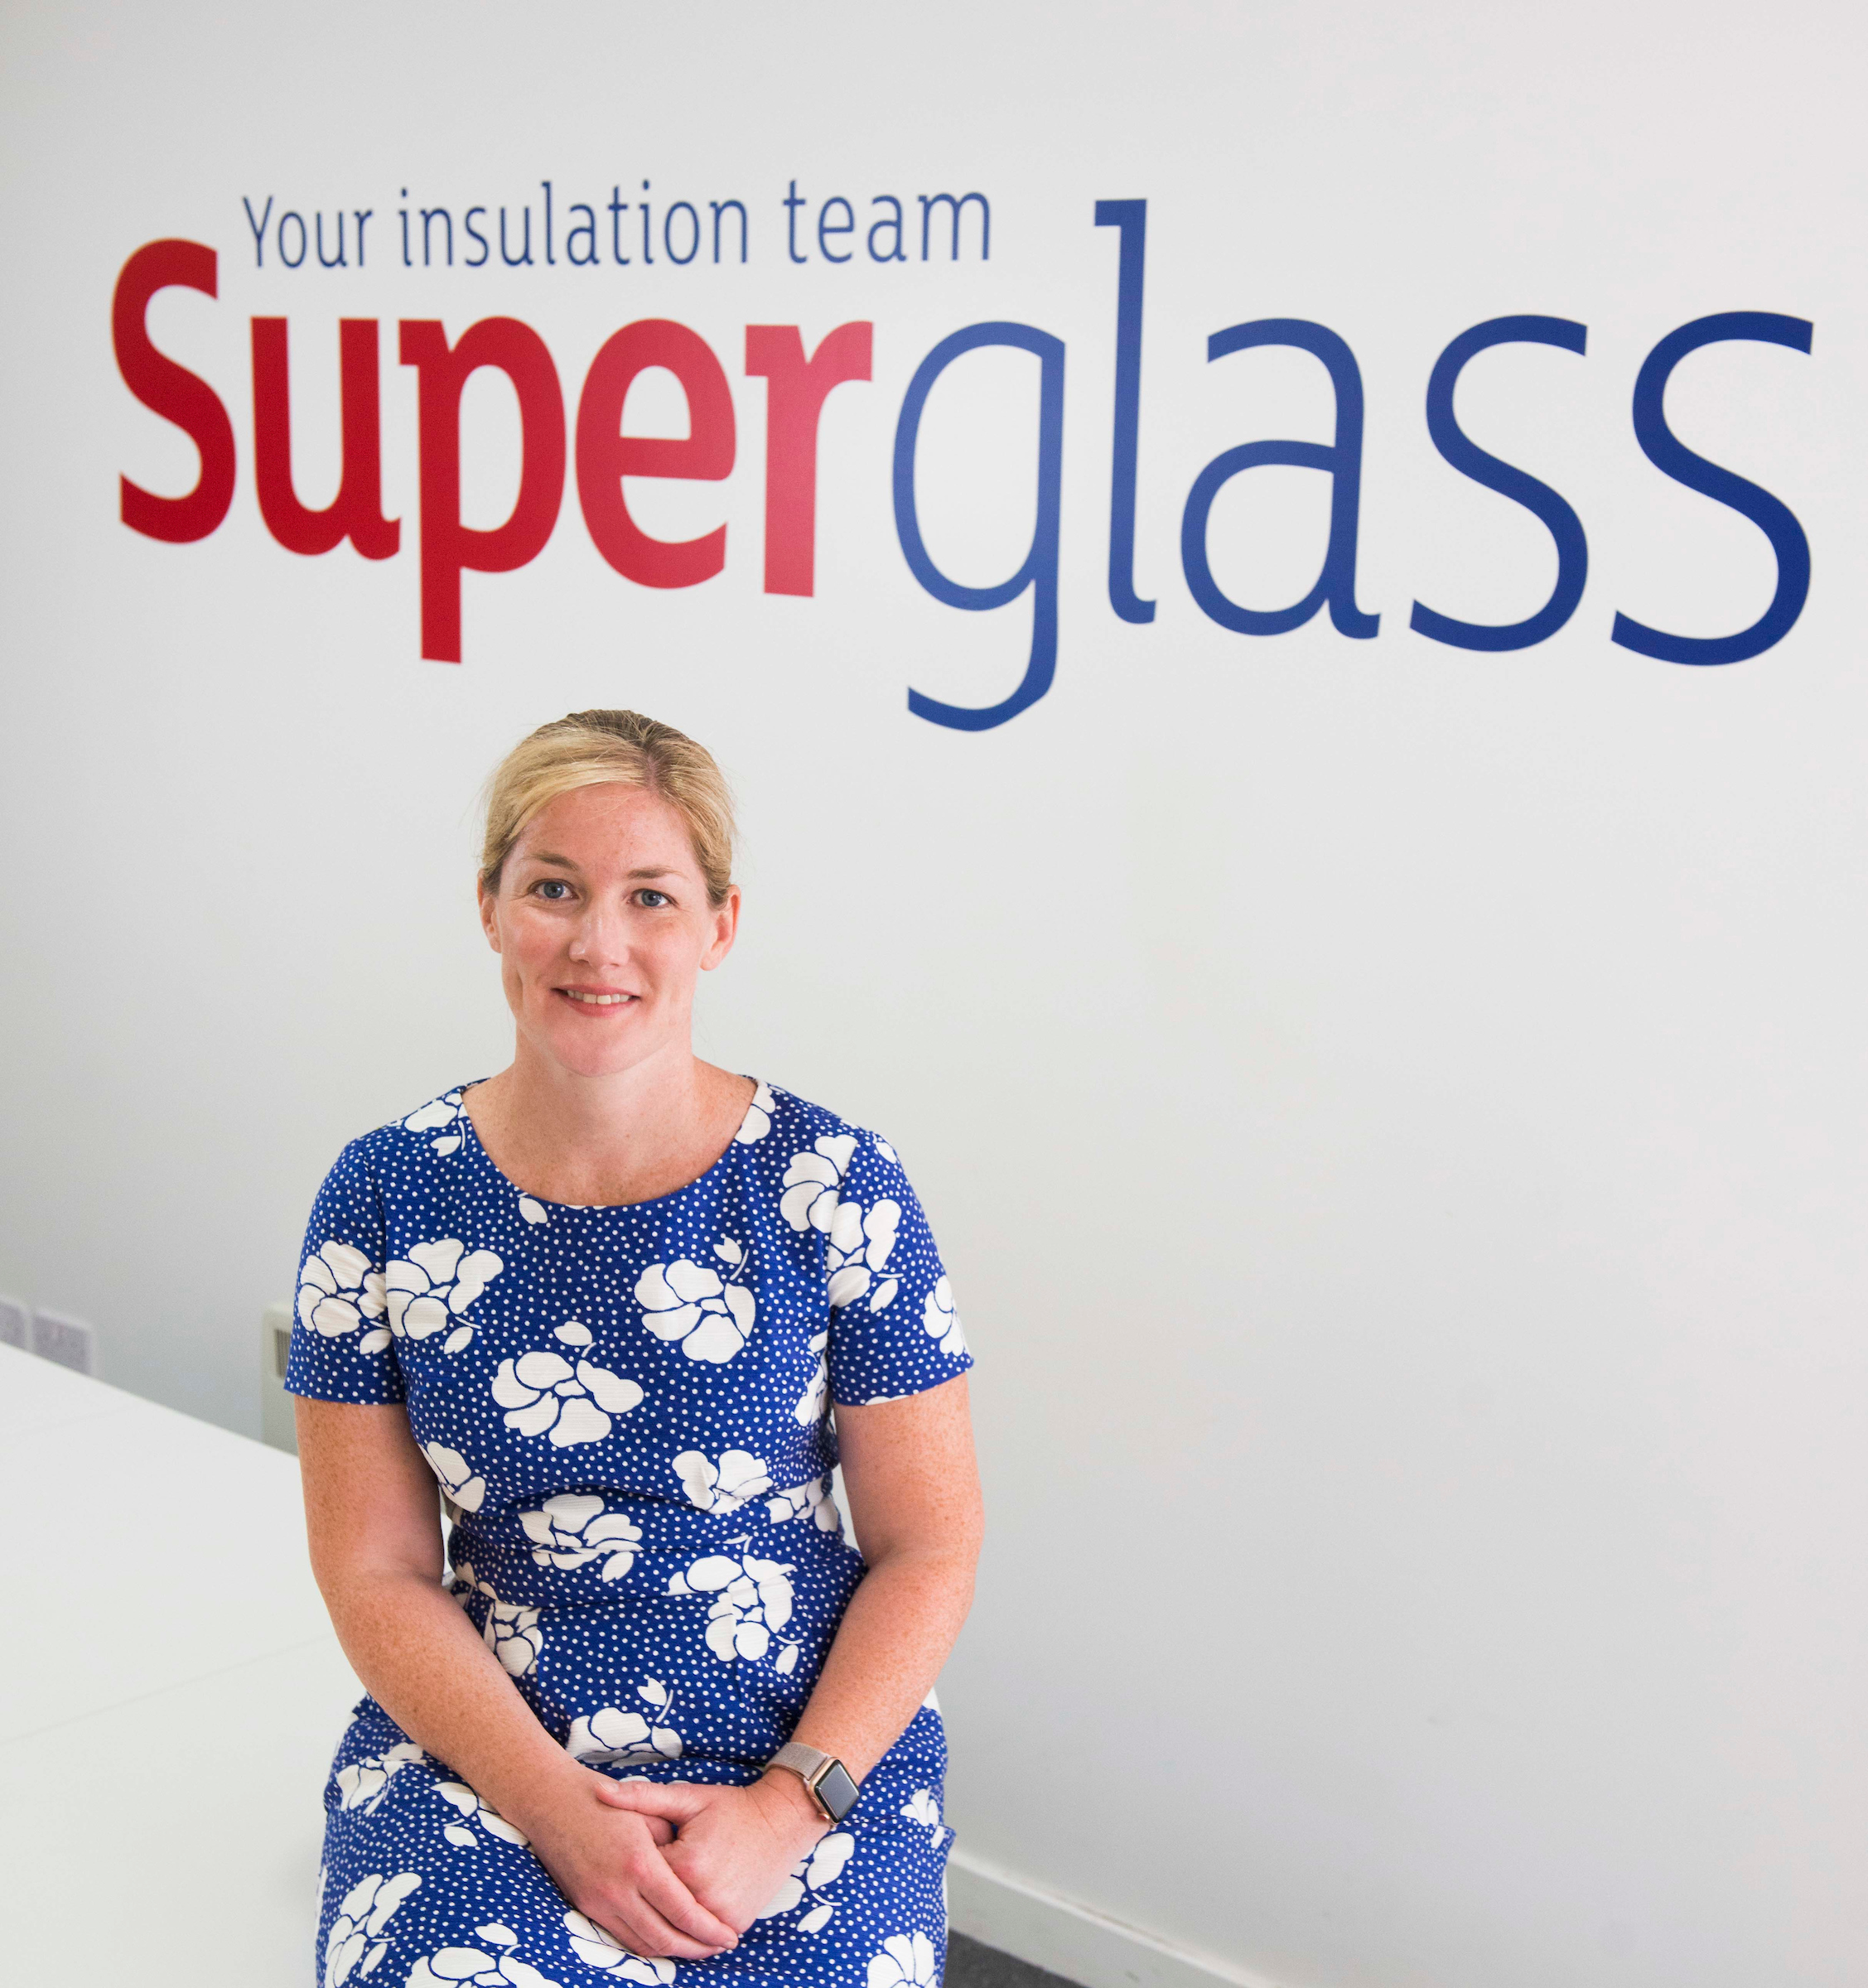 Superglass records trading profit with 39% revenue growth